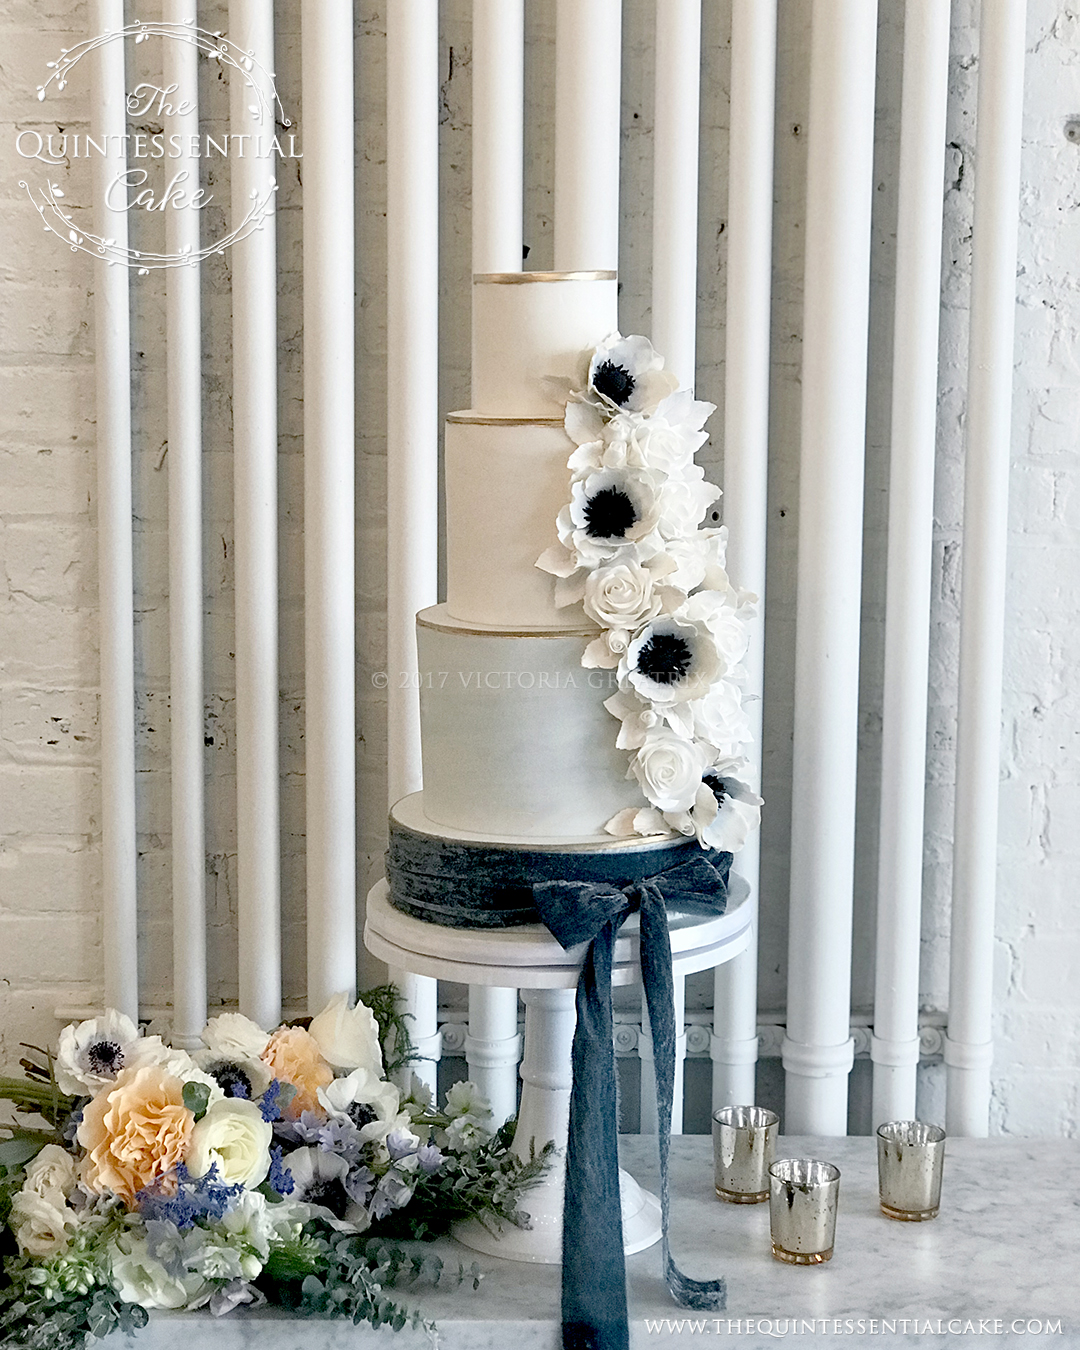 Blue Marble with Sugar Roses & Anemones | The Quintessential Cake | Chicago | Luxury Wedding Cakes | Company 251